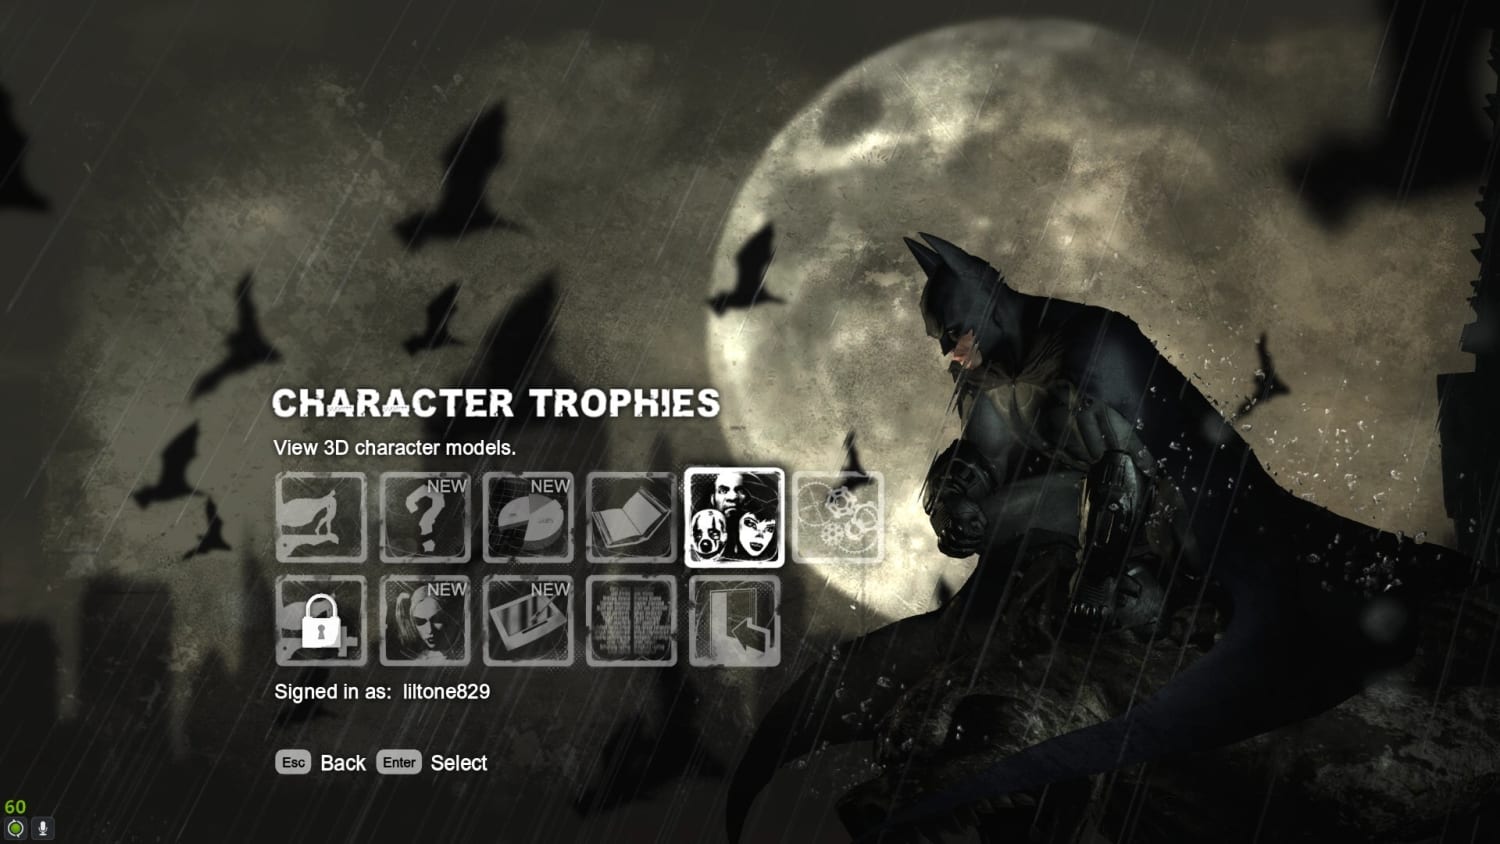 the occassional villains on the main menu of batman arkham city are actually being fought by batman, in the main menu itself